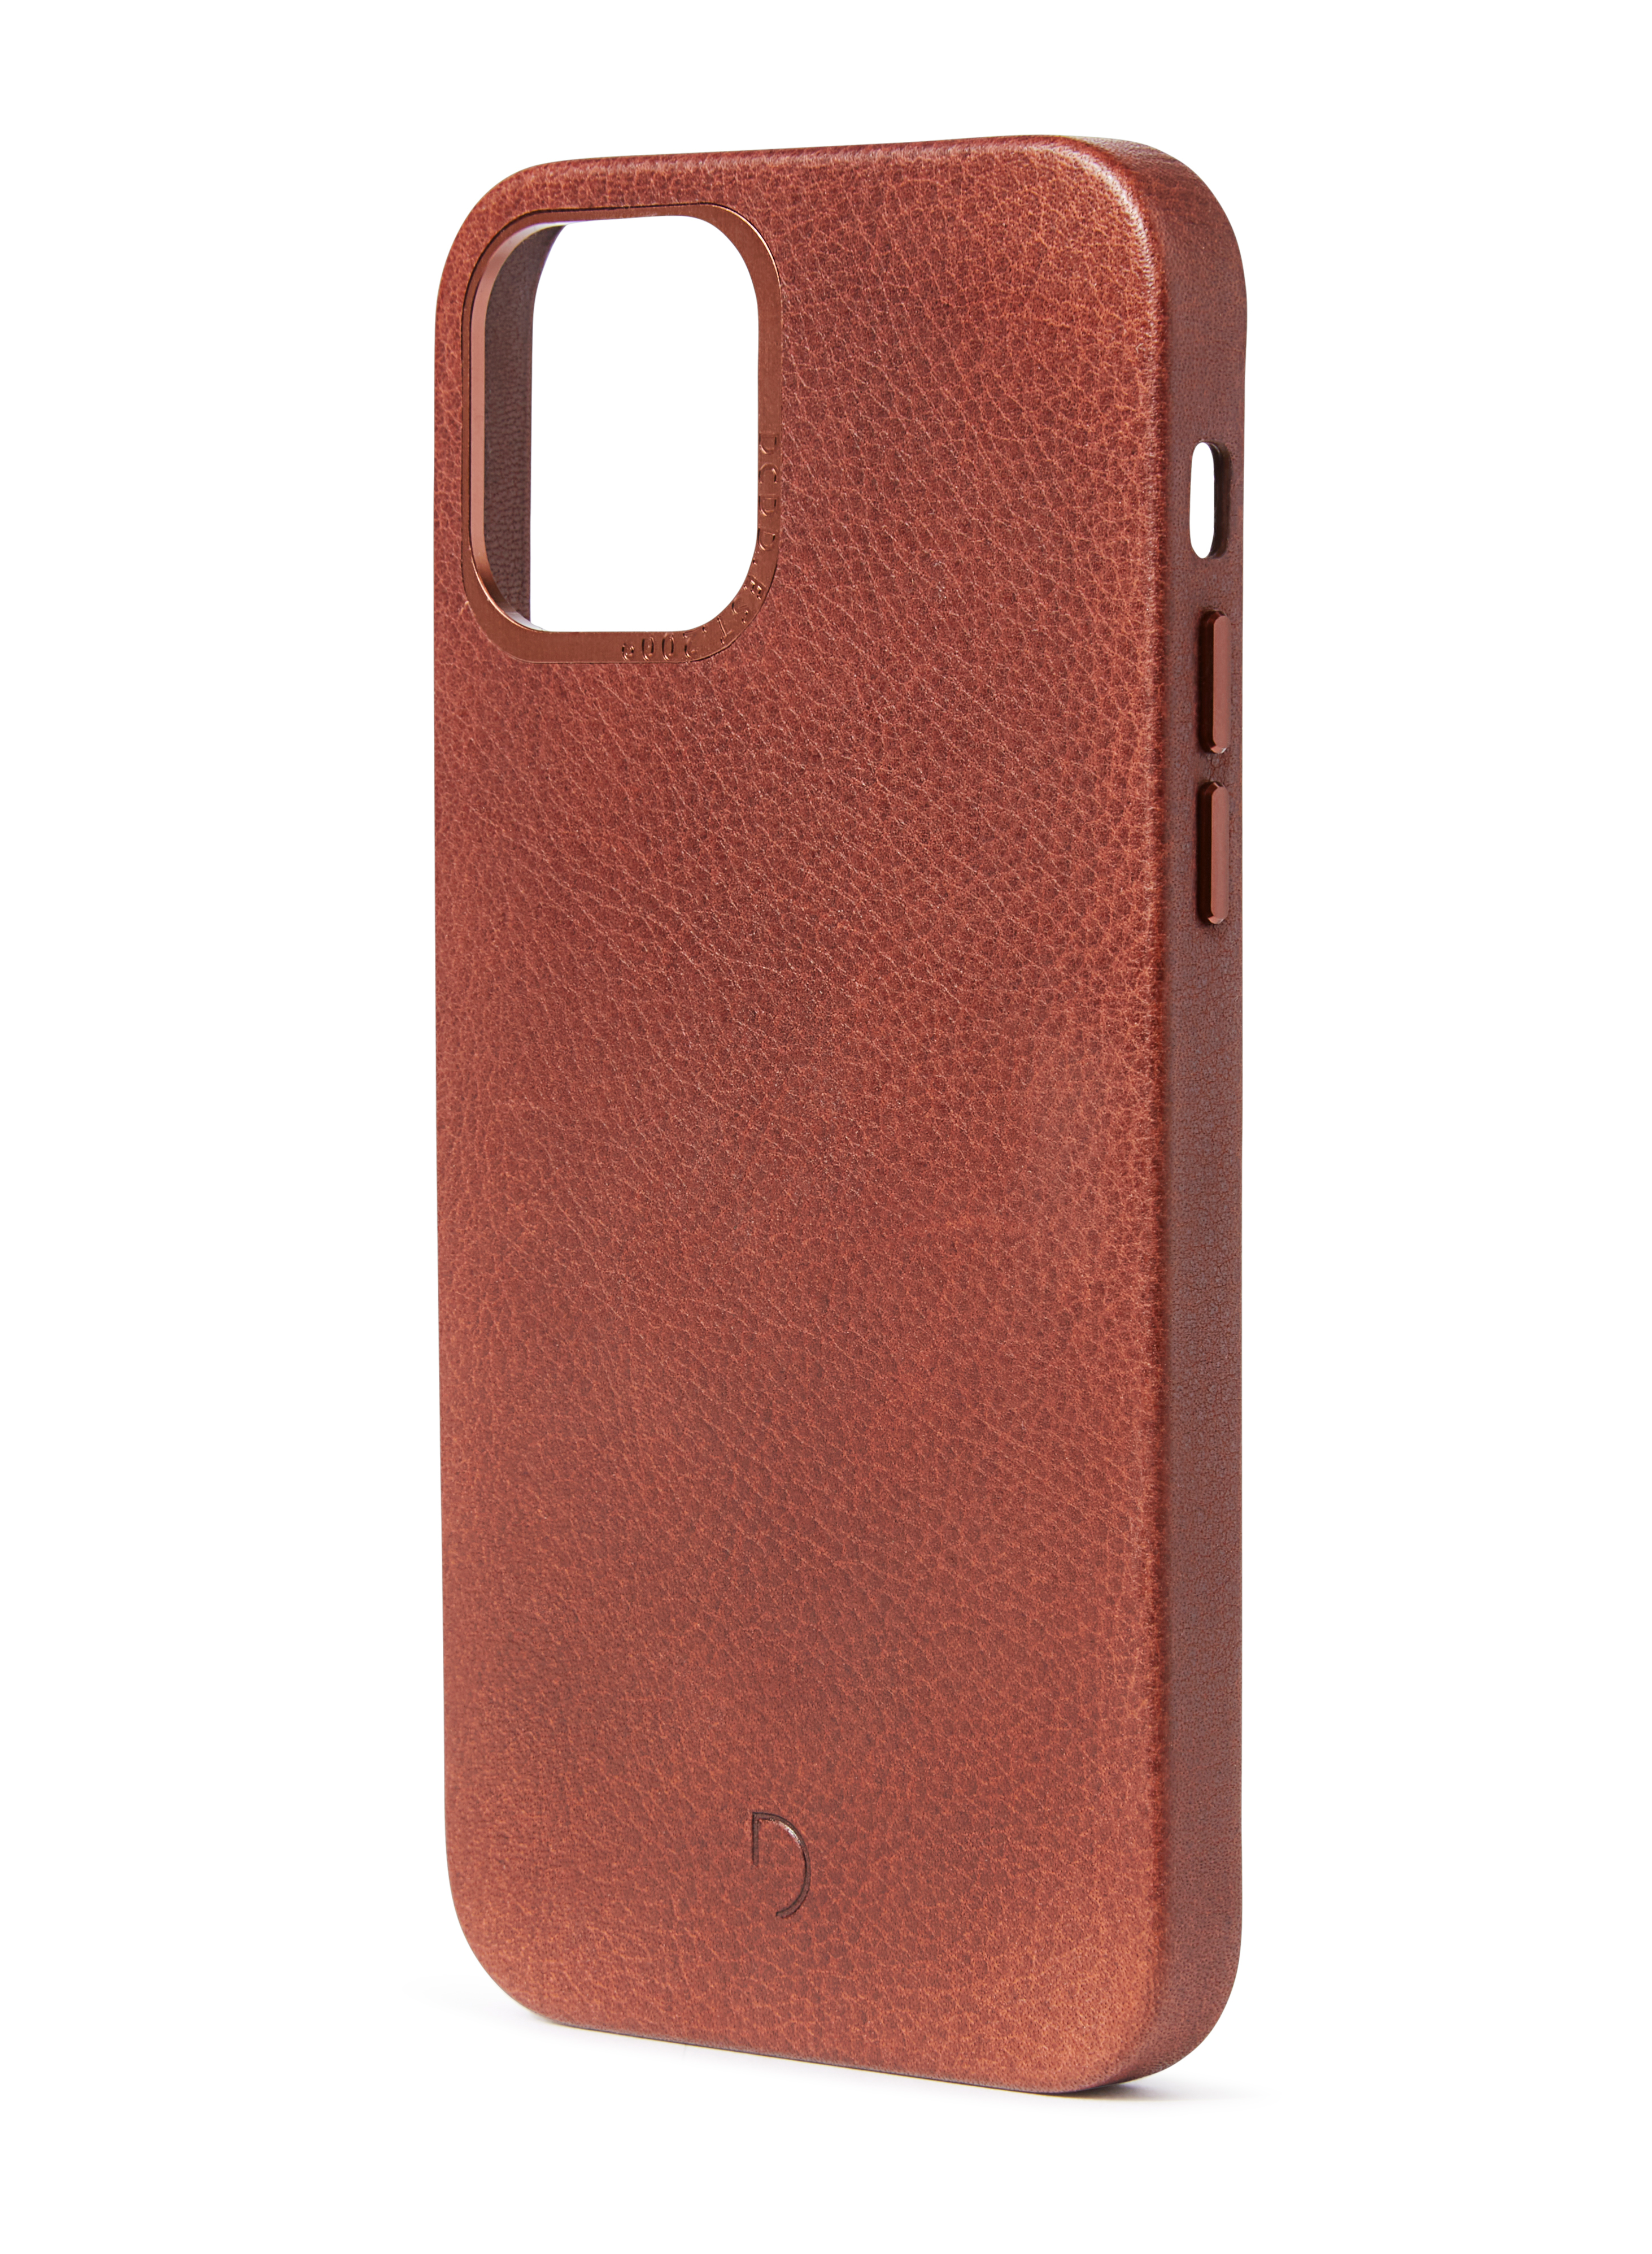 iPhone 12 Pro Max, leather case magsafe, cinnamon brown